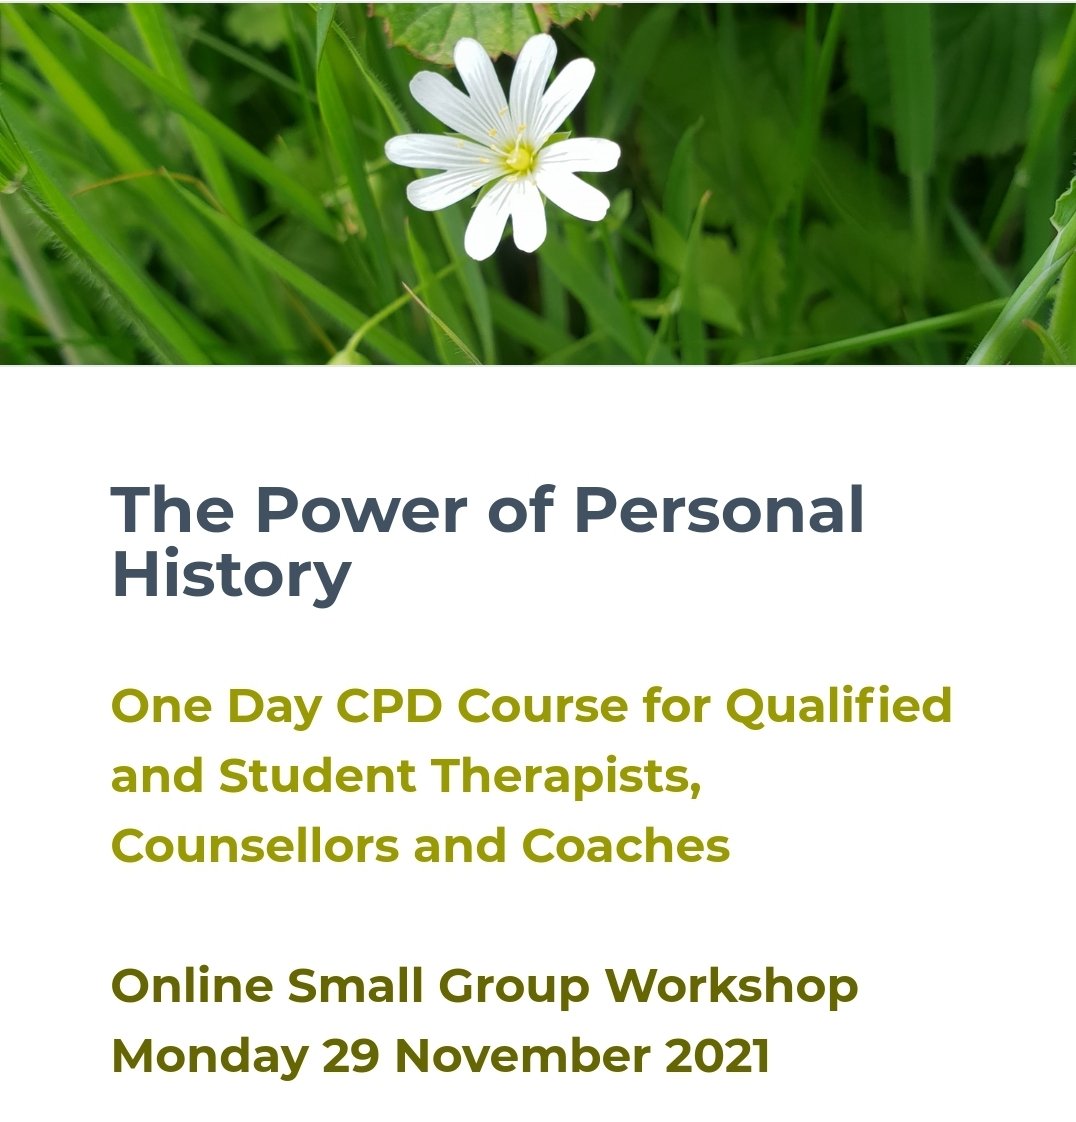 We have one place left on this online small-group CPD workshop on 29 November if you would like to join us - The Power of Personal History. scnlh.org/the-power-of-p…

#TherapyCPD #PersonalHistory #Psychotherapy #Hypnotherapy #Counselling #TherapistsConnect